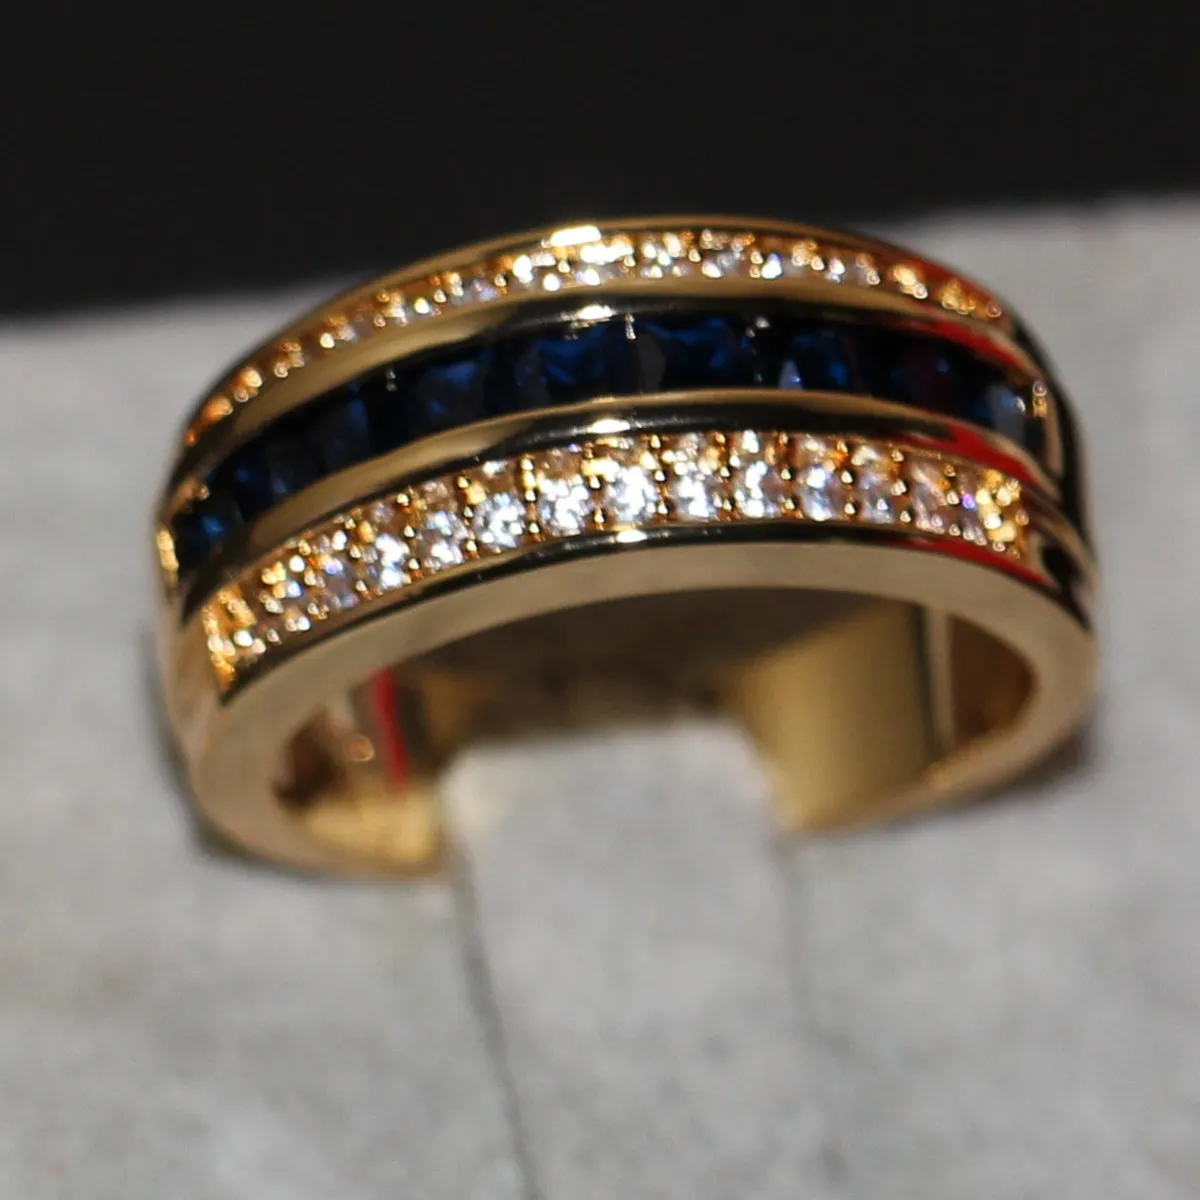 2018 New Arrival Fashion Jewelry Handmade 10KT Yellow Gold Filled Princess Cut Blue Sapphire Party CZ Diamond Men Wedding Band Finger Ring